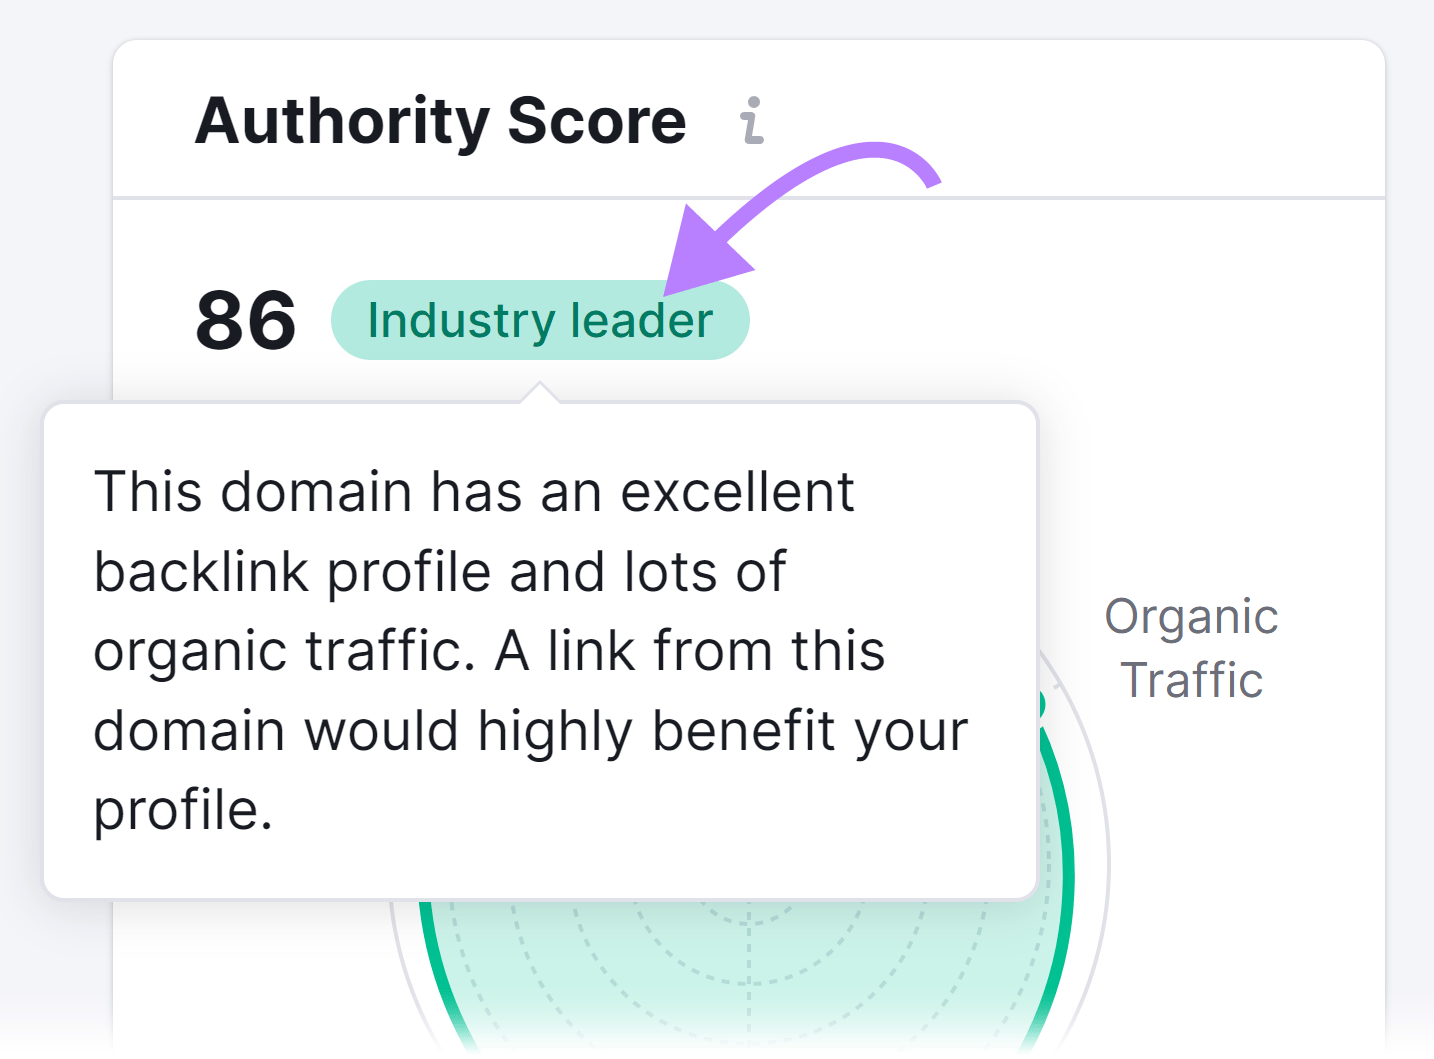 "Authority Score" showing "86 Industry leader" in the Backlink Analytics report, with explanation "This domain has an excellent backlink profile and lots of organic traffic. A link from this domain would highly benefit your profile."